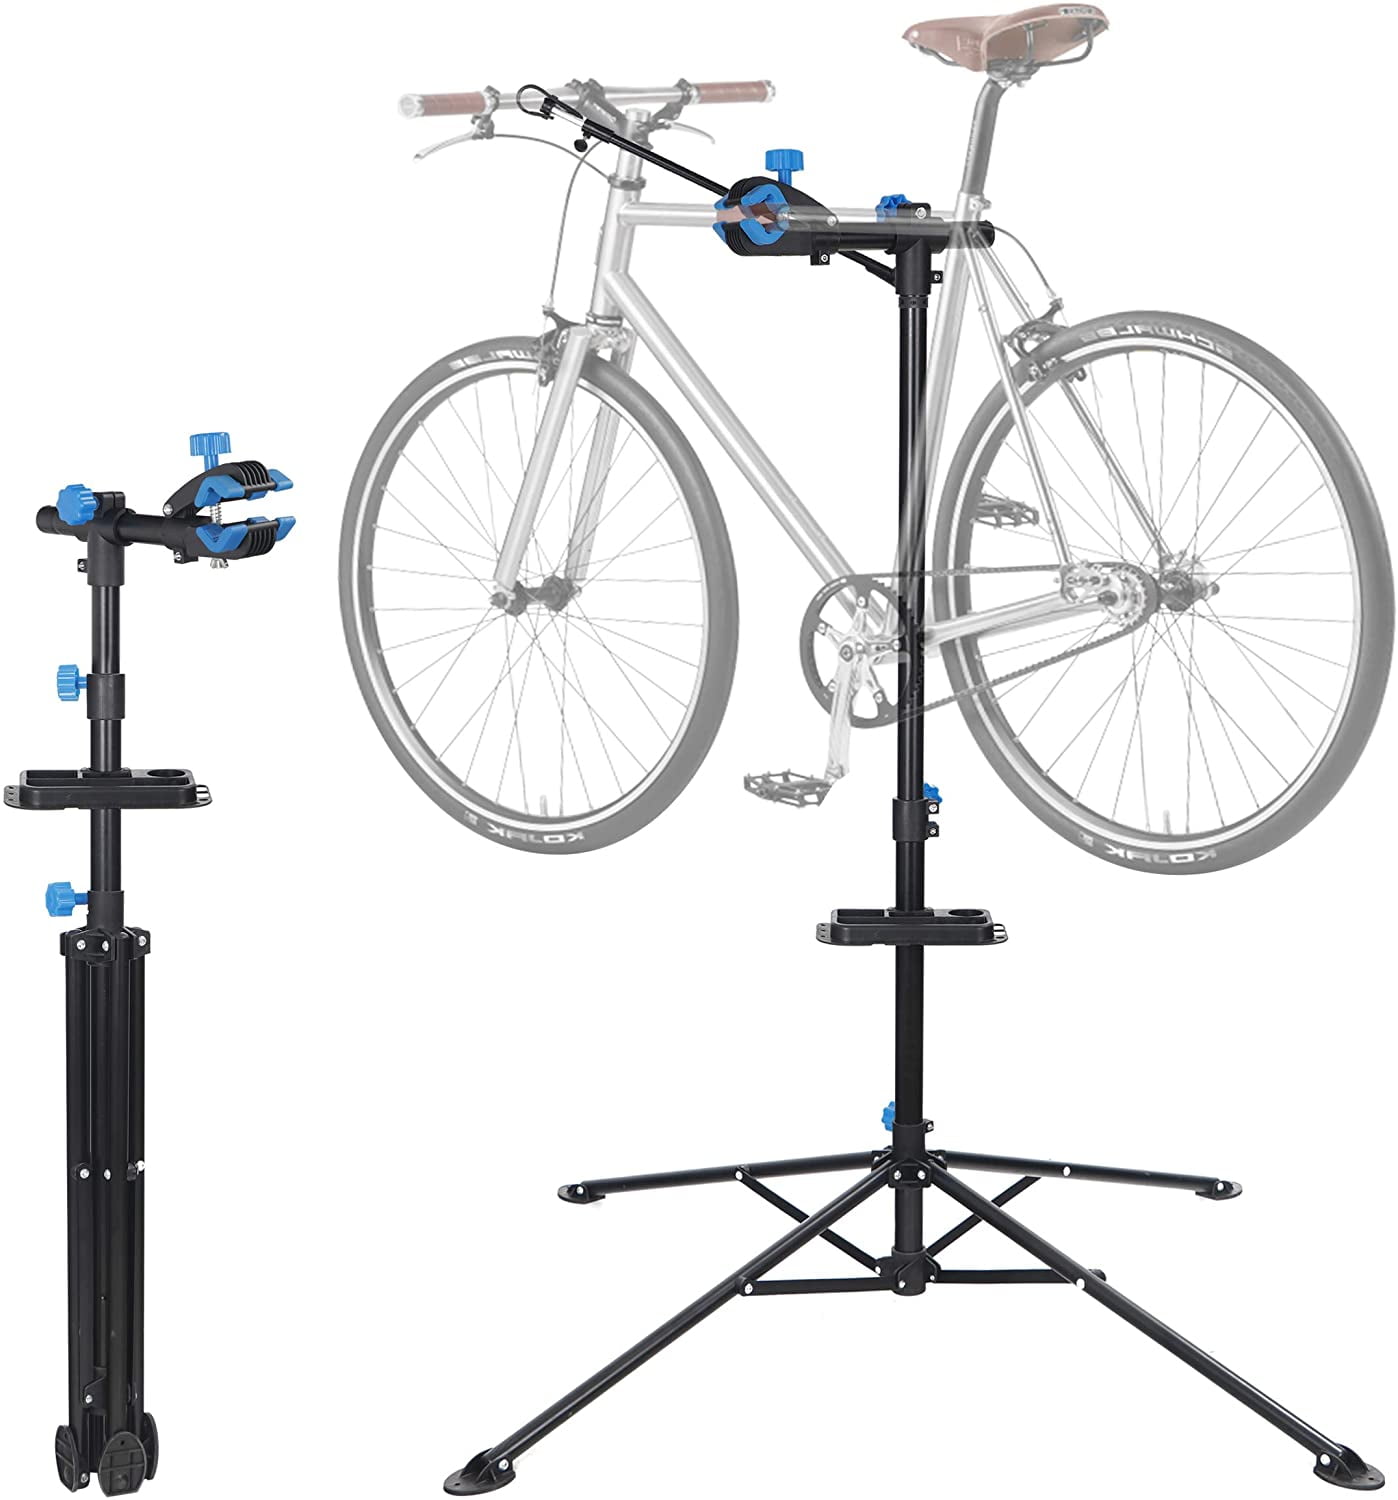 DNC Bike Repair Stand Foldable Bicycle Wall Mount Rack Workstand